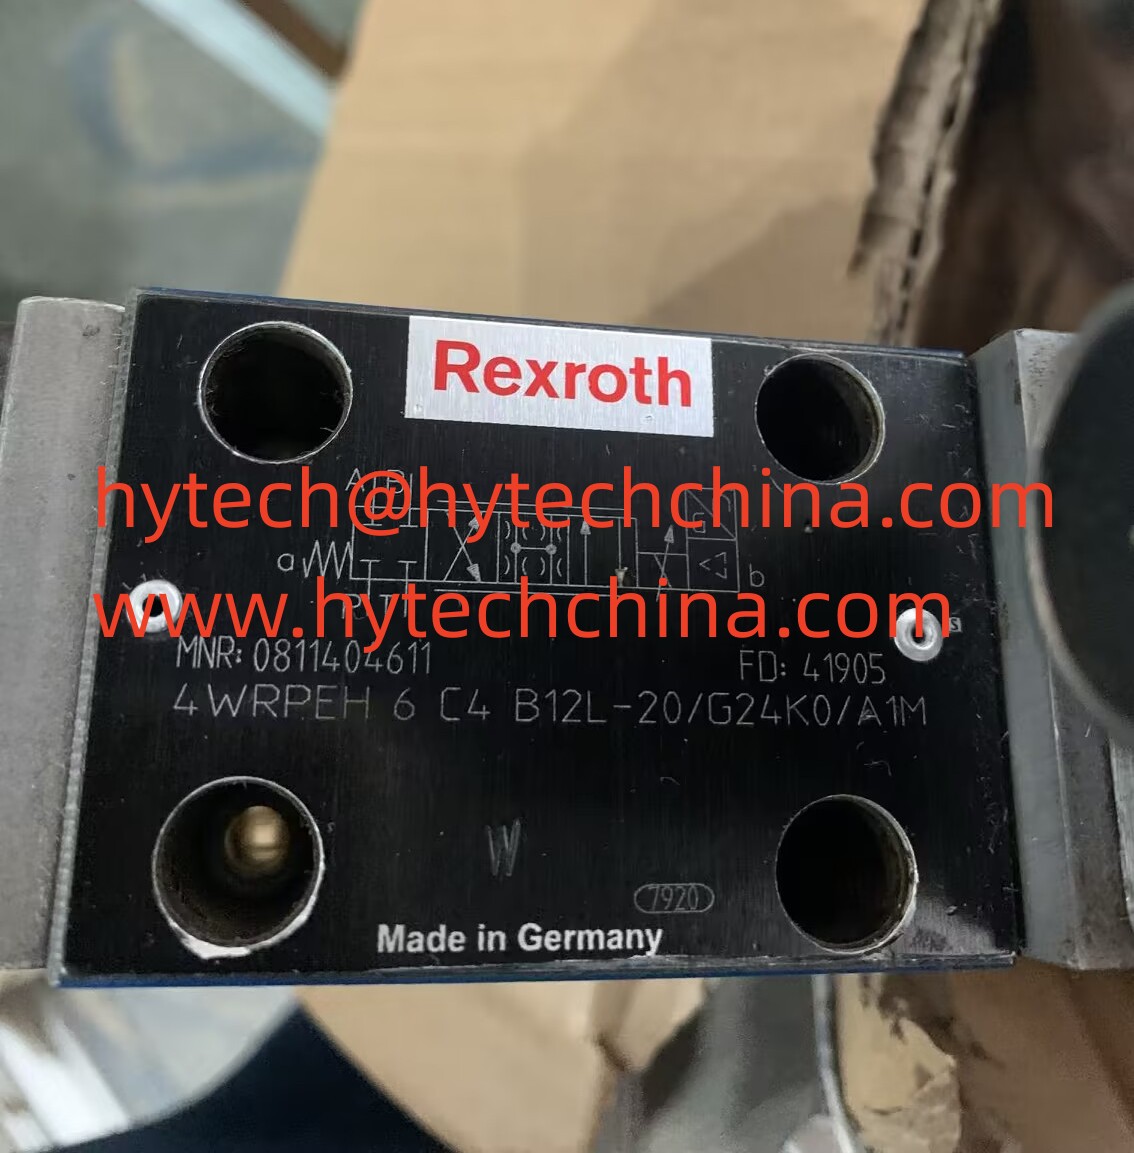 Rexroth hydraulic valve 4 WRPEH 6 C4 B12L – 20/G24K0/A1M are in stock.